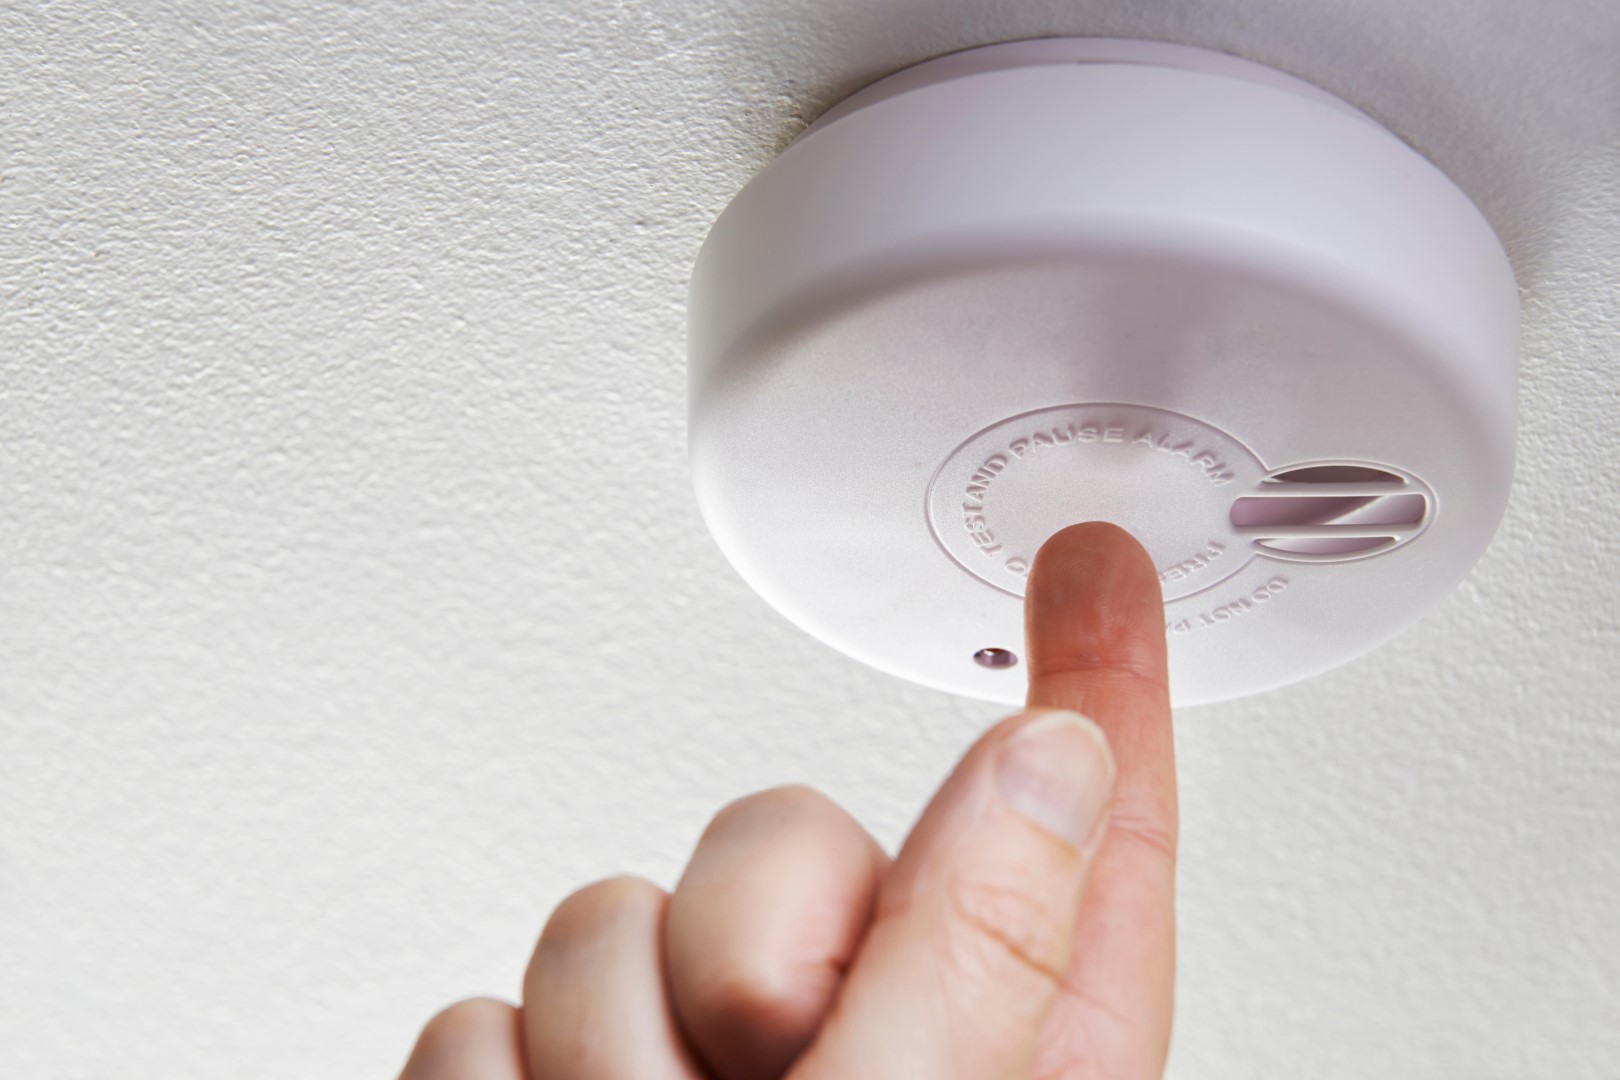 How To Turn Off A Carbon Monoxide Detector